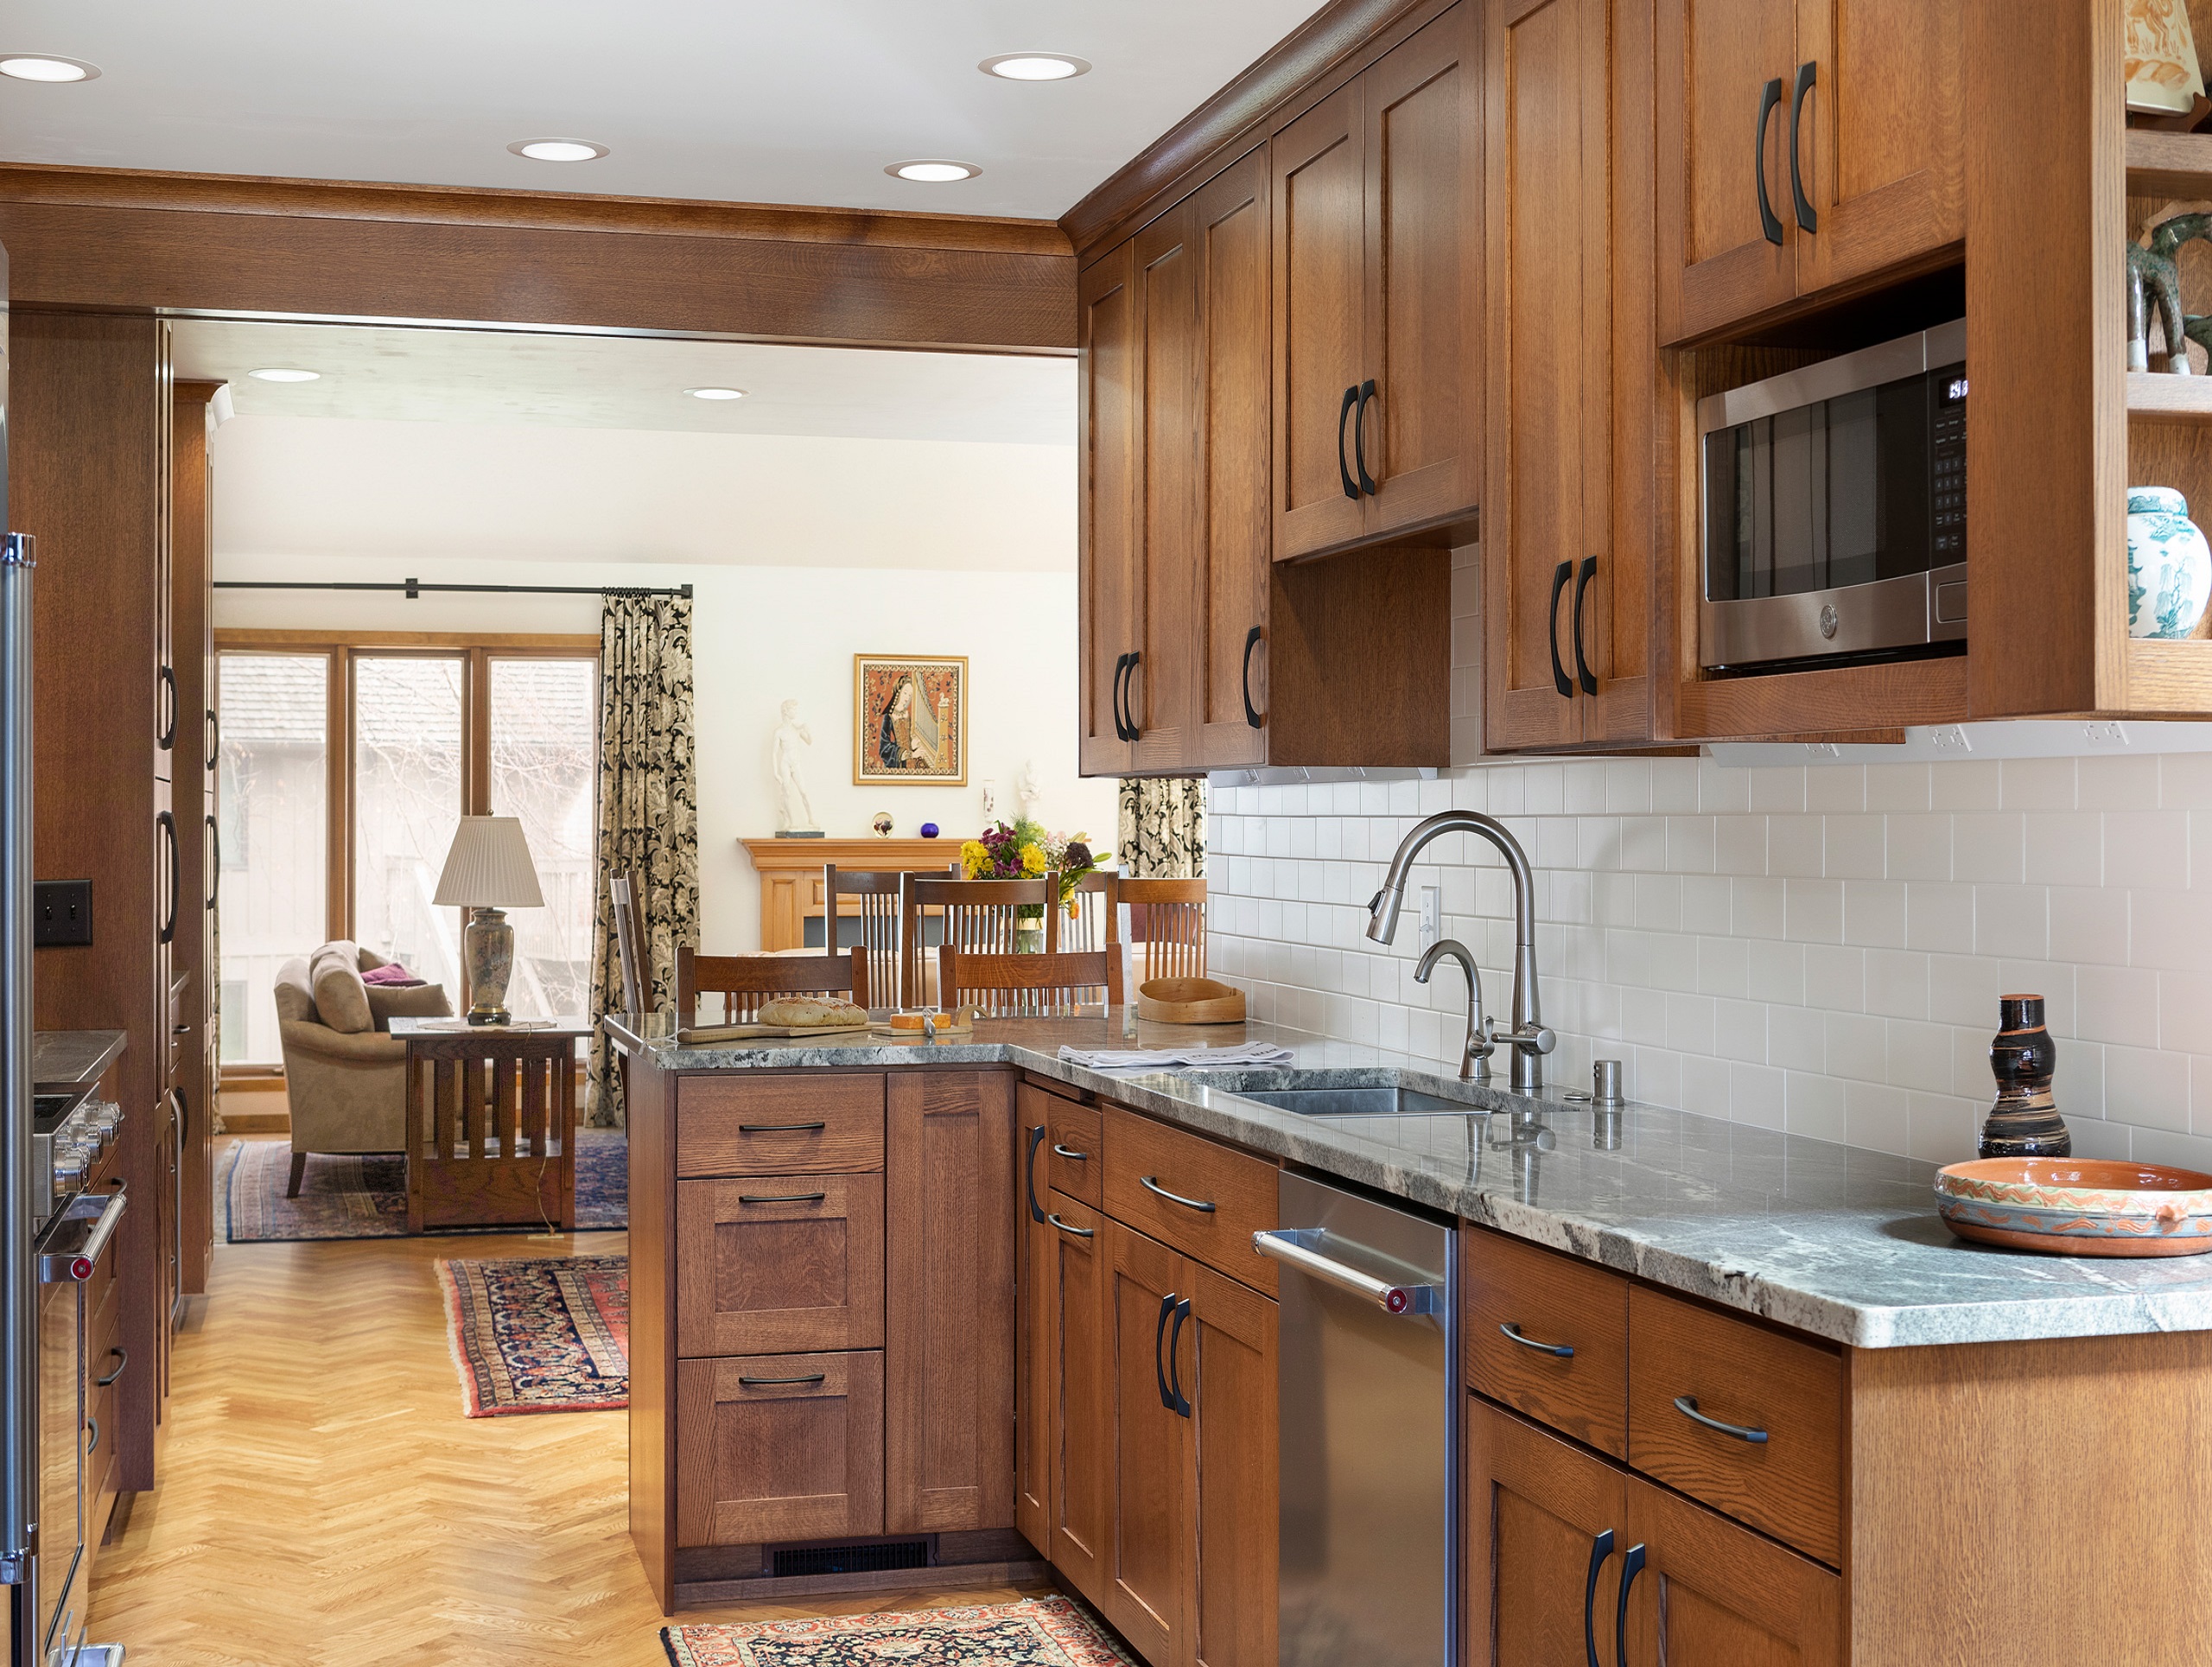 Timeless kitchen with brown cabinetry, marble counters, and hardwood floors.